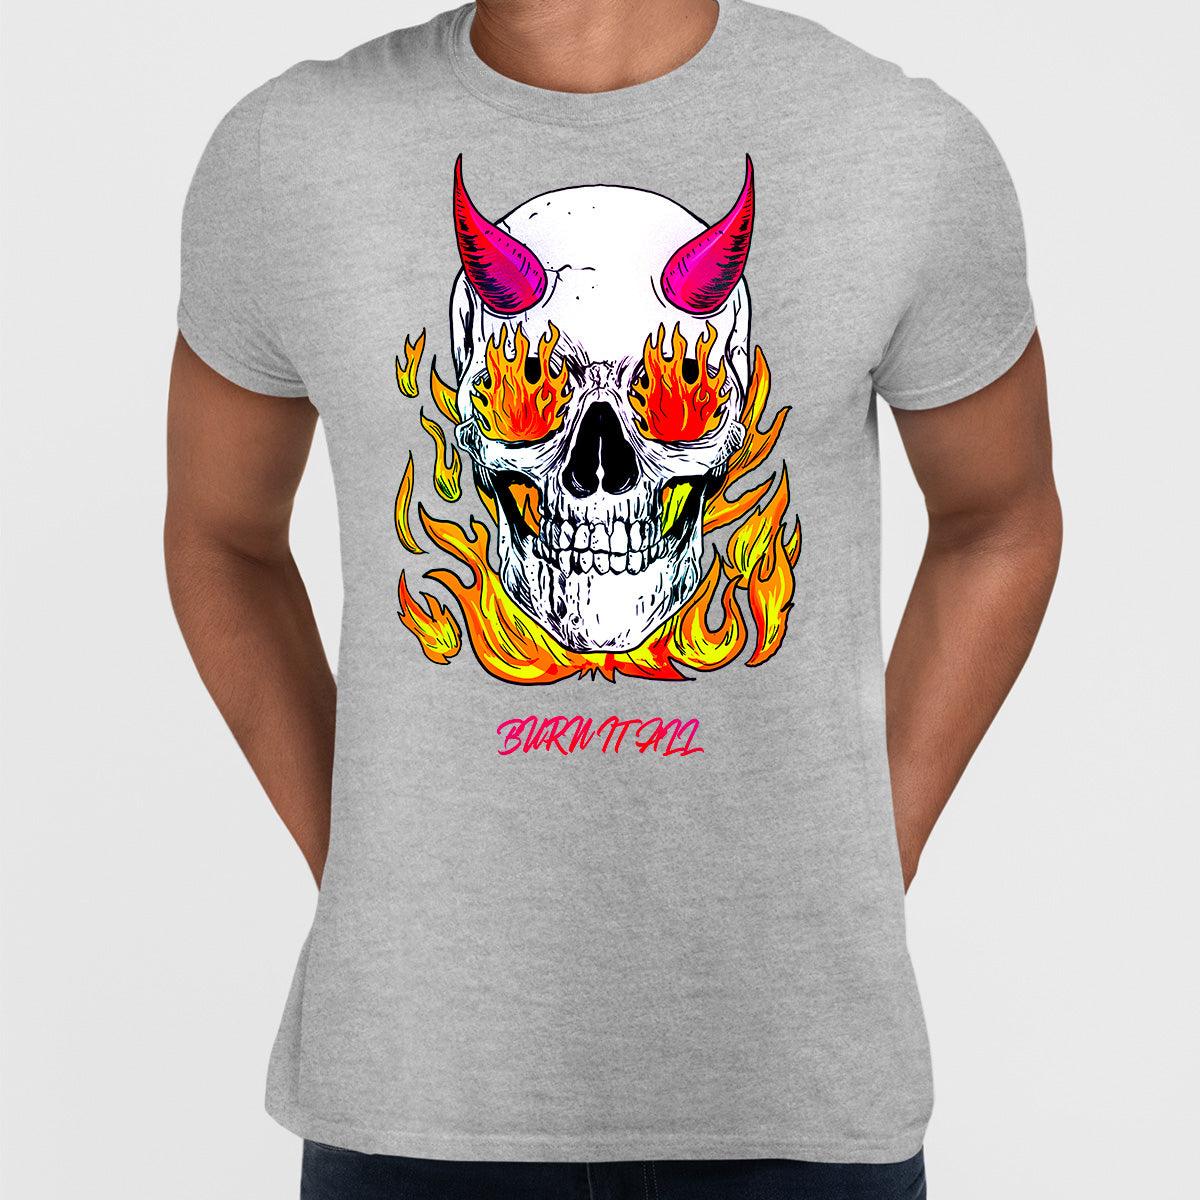 Brutal Skull Hell and Devil Flames T-shirts with an Attitude For men and women - Kuzi Tees